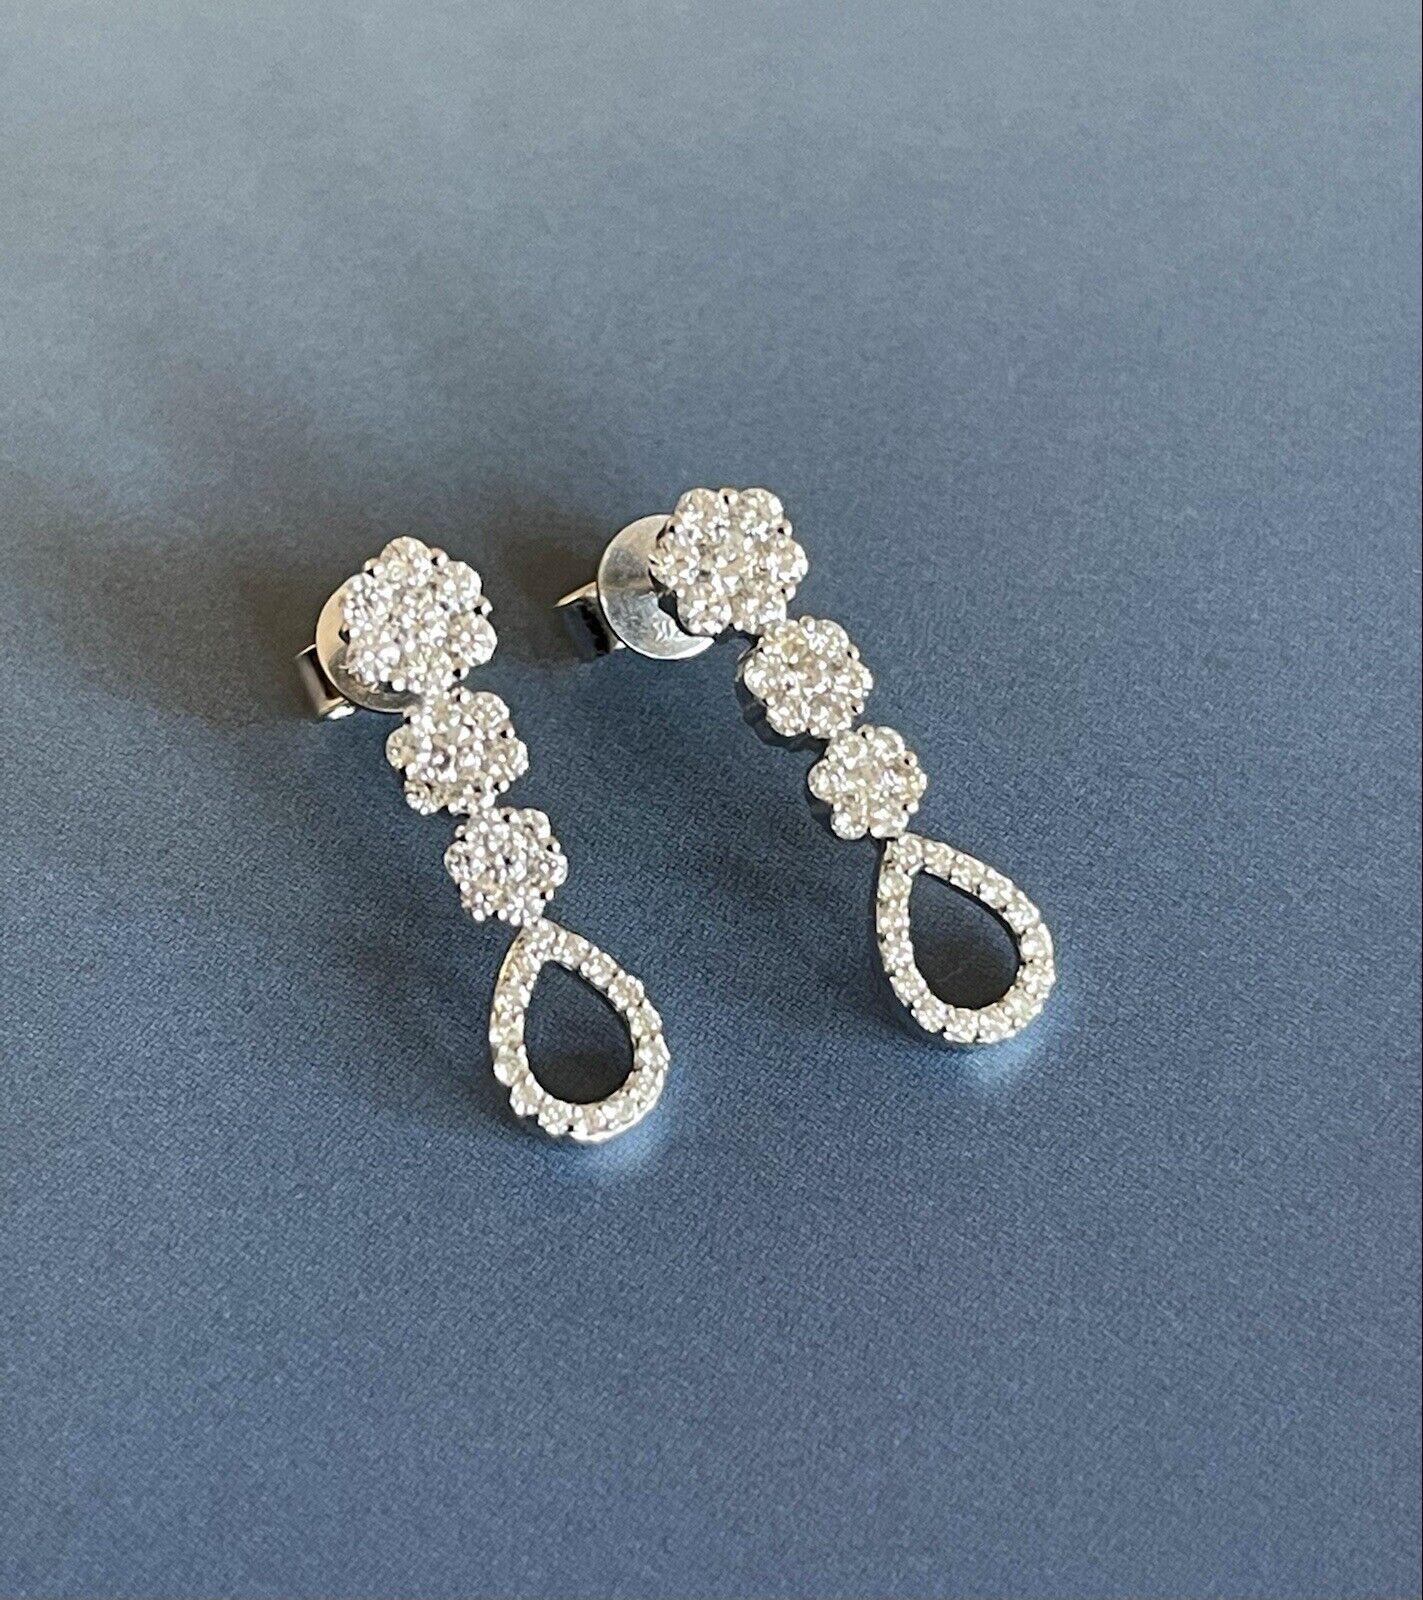 Earrings are the most sought after piece of jewellery as it adds sparkle to your face.

Modern chic meets High fine jewellery in this piece

It can make a great cocktail outfit piece or bridal

Matching Daisy 1ct necklace is also listed

Sparkling